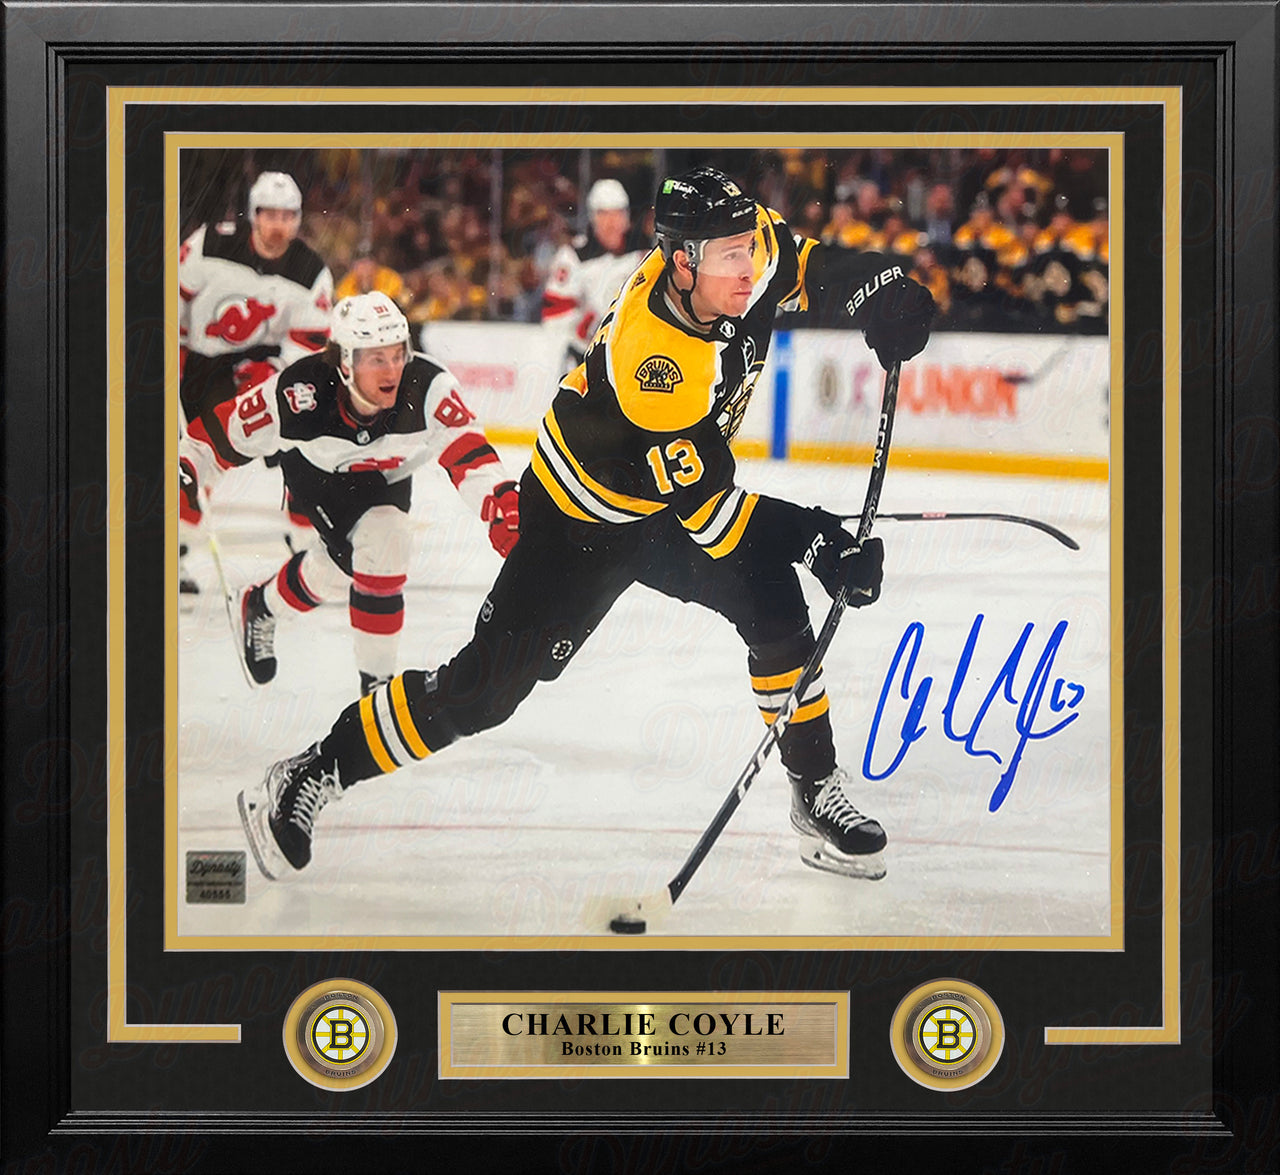 Charlie Coyle in Action Boston Bruins Autographed 11" x 14" Framed Hockey Photo